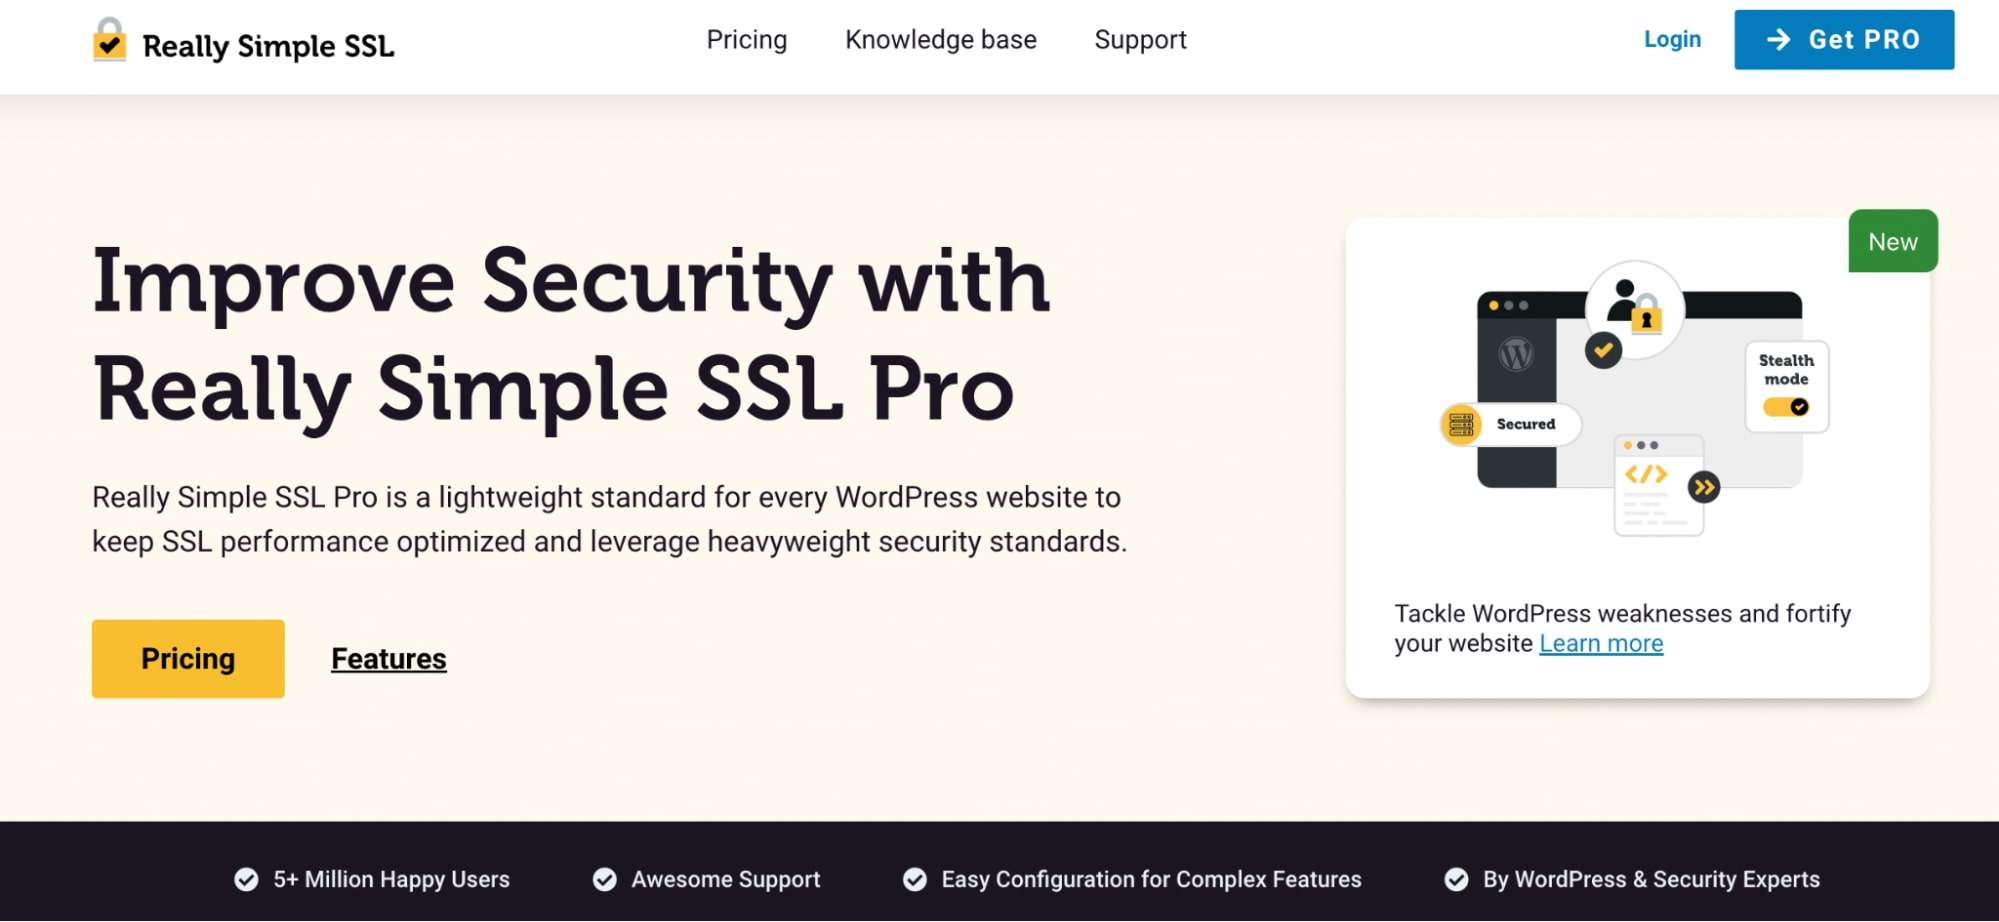 Really Simple SSL is one of the best free WordPress plugins to integrate SSL certificates into your website,